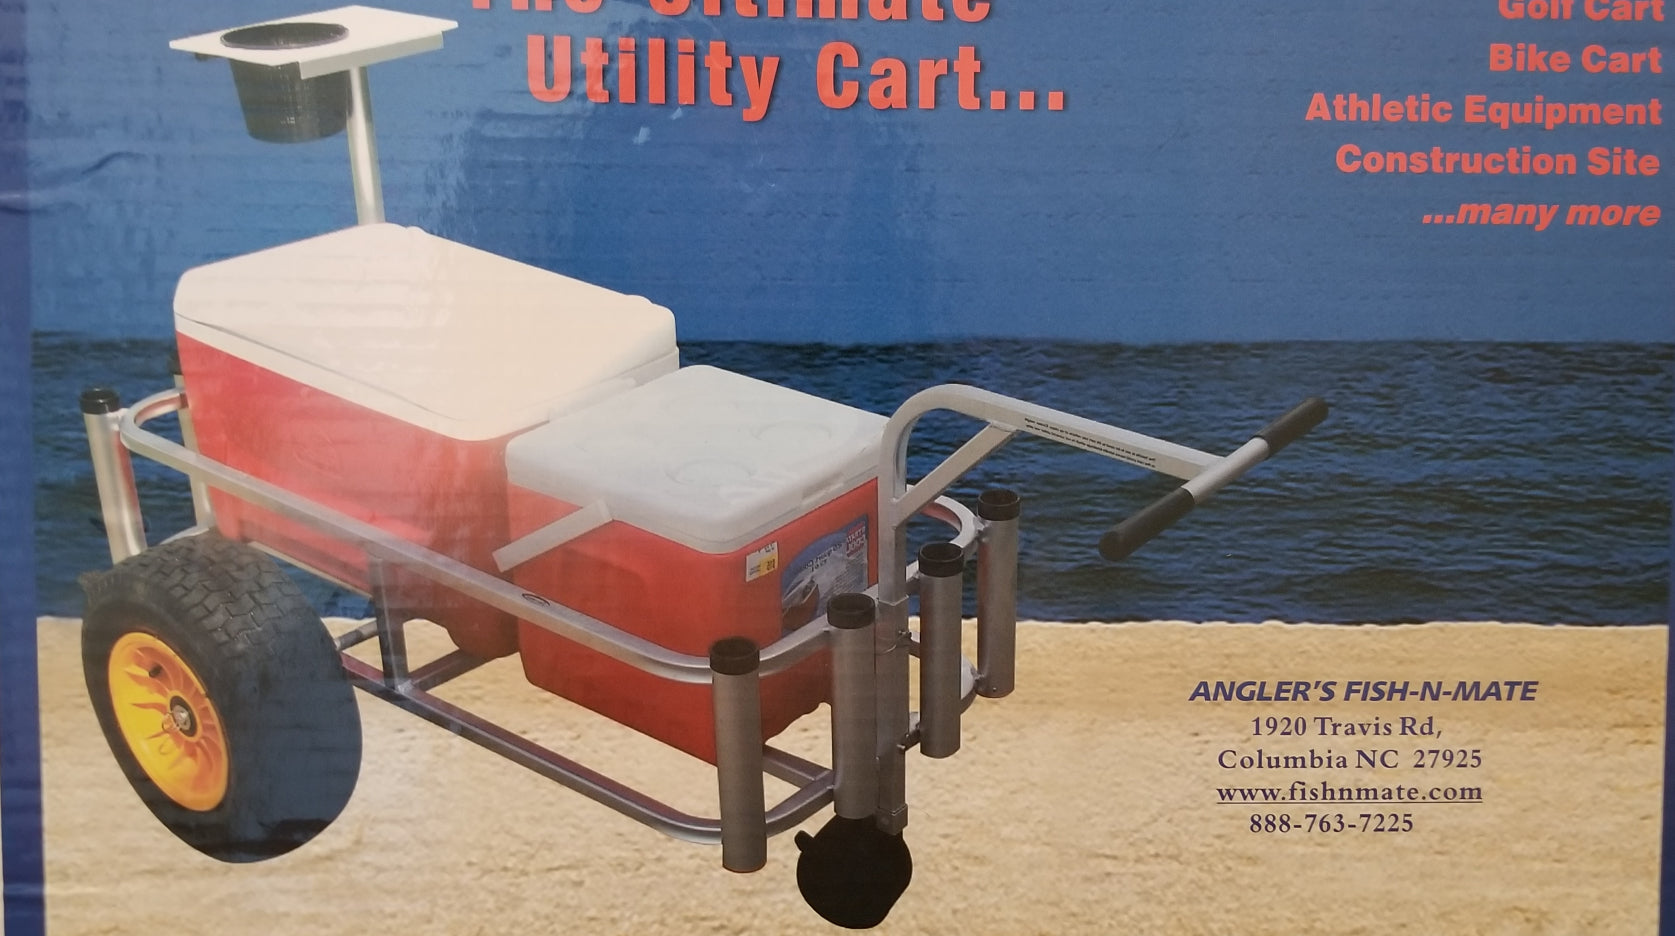 Angler's Fish-N-Mate Sr. Cart REVIEW!!! A MUST HAVE!!! 